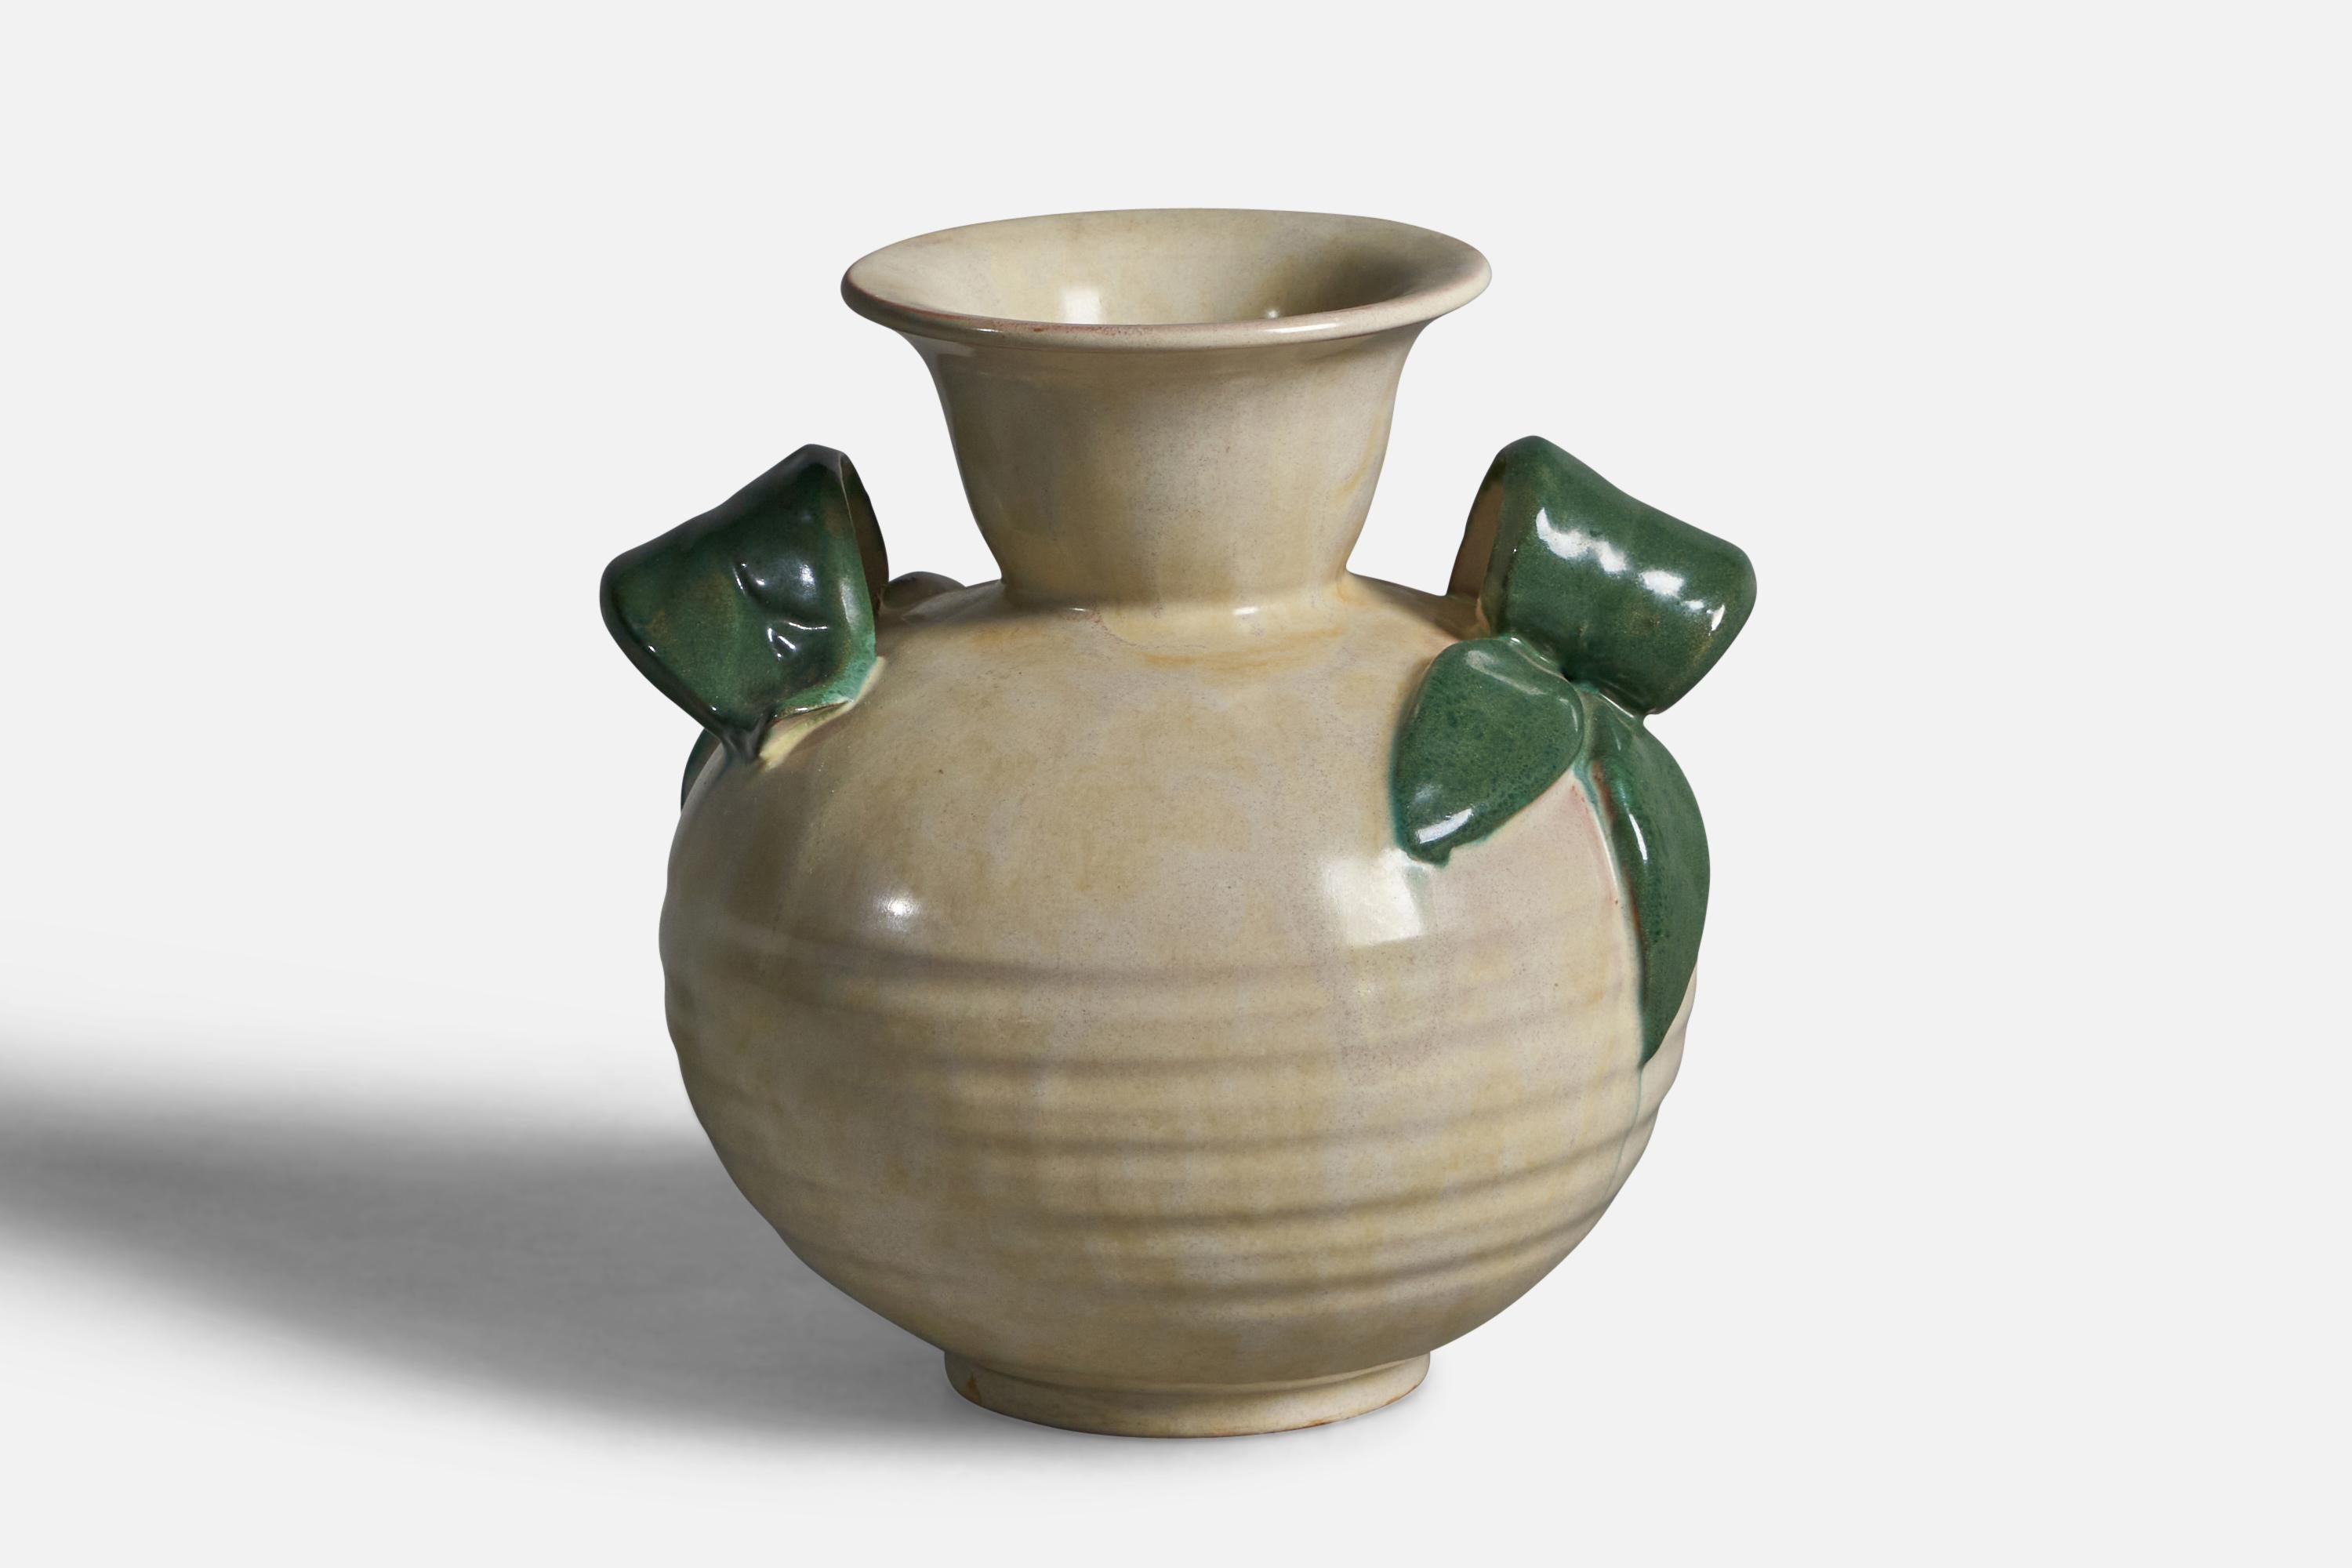 An incised green and off-white-glazed earthenware vase designed and produced by Upsala Ekeby, Sweden, 1930s.